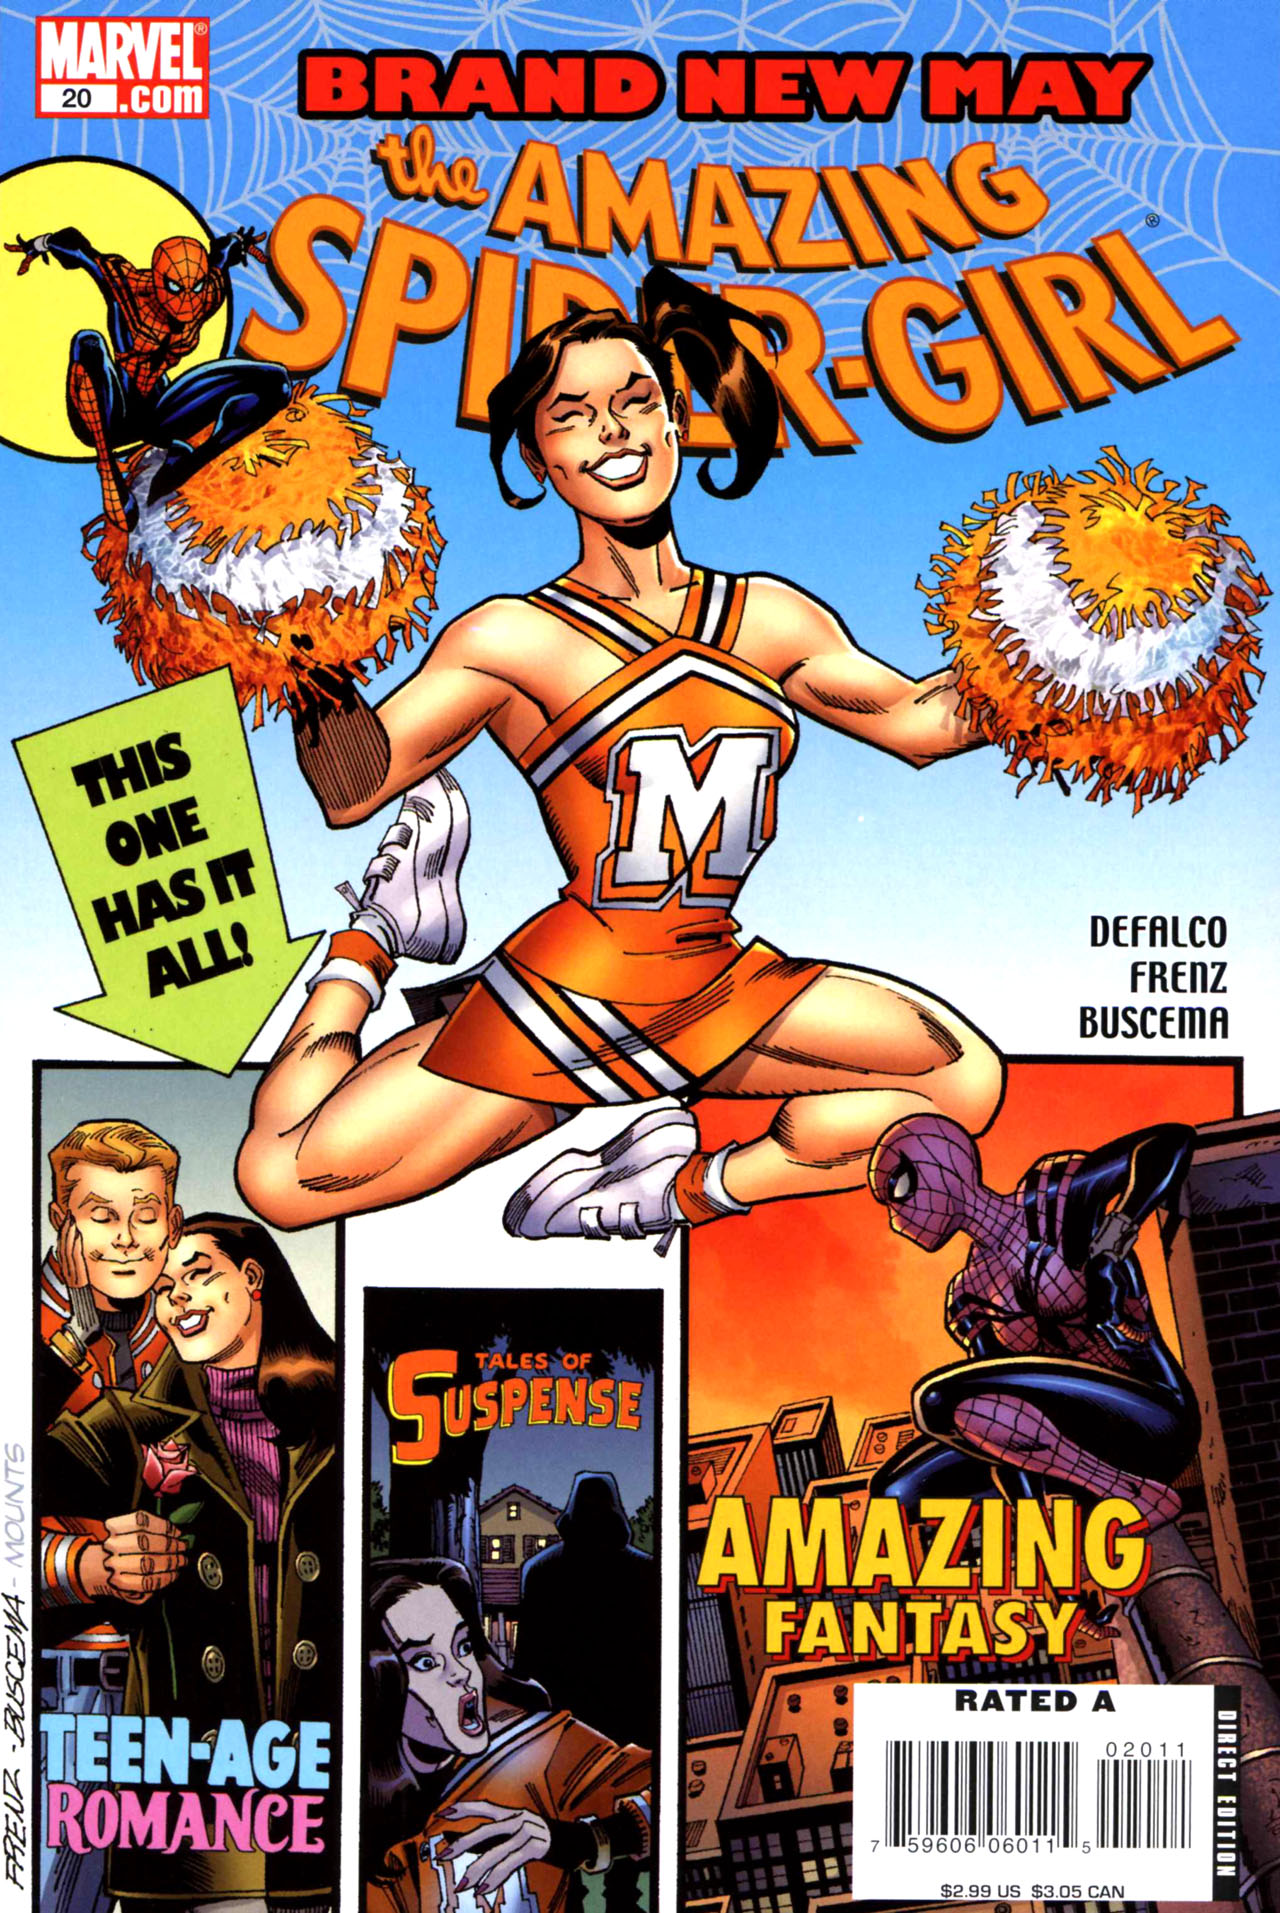 Read online Amazing Spider-Girl comic -  Issue #20 - 1